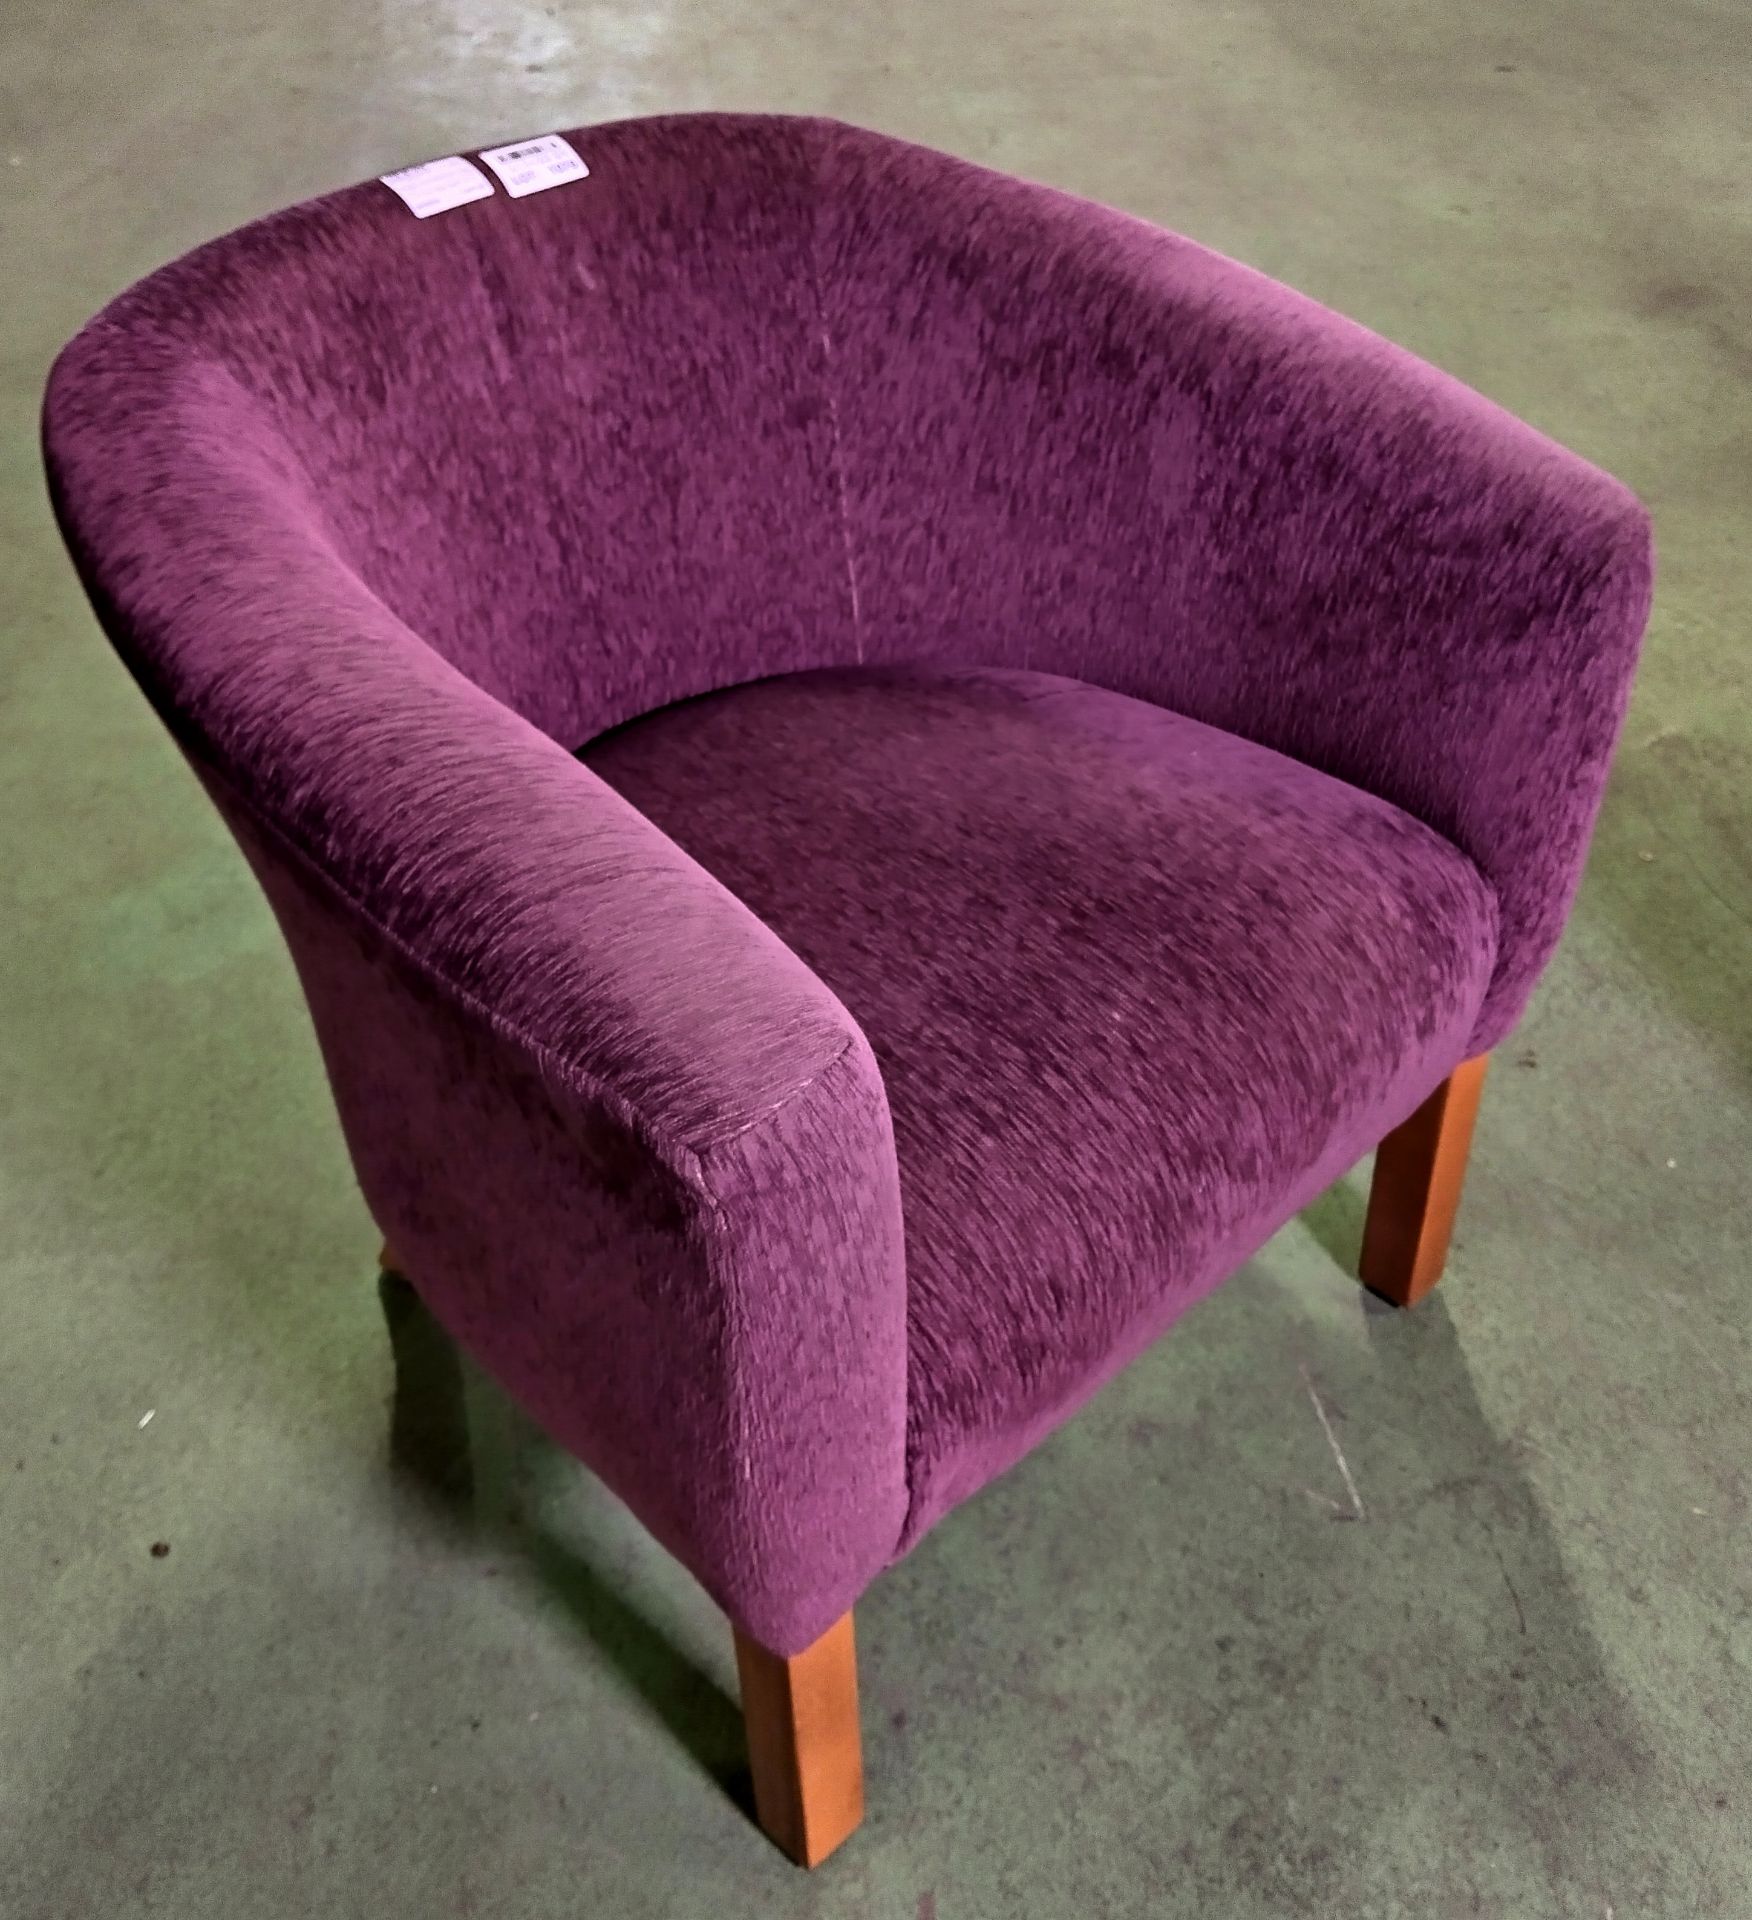 2x Purple upholstered arm chairs - worn in places - W 68 x D 68 x H 70cm Seat height 44cm - Image 3 of 3